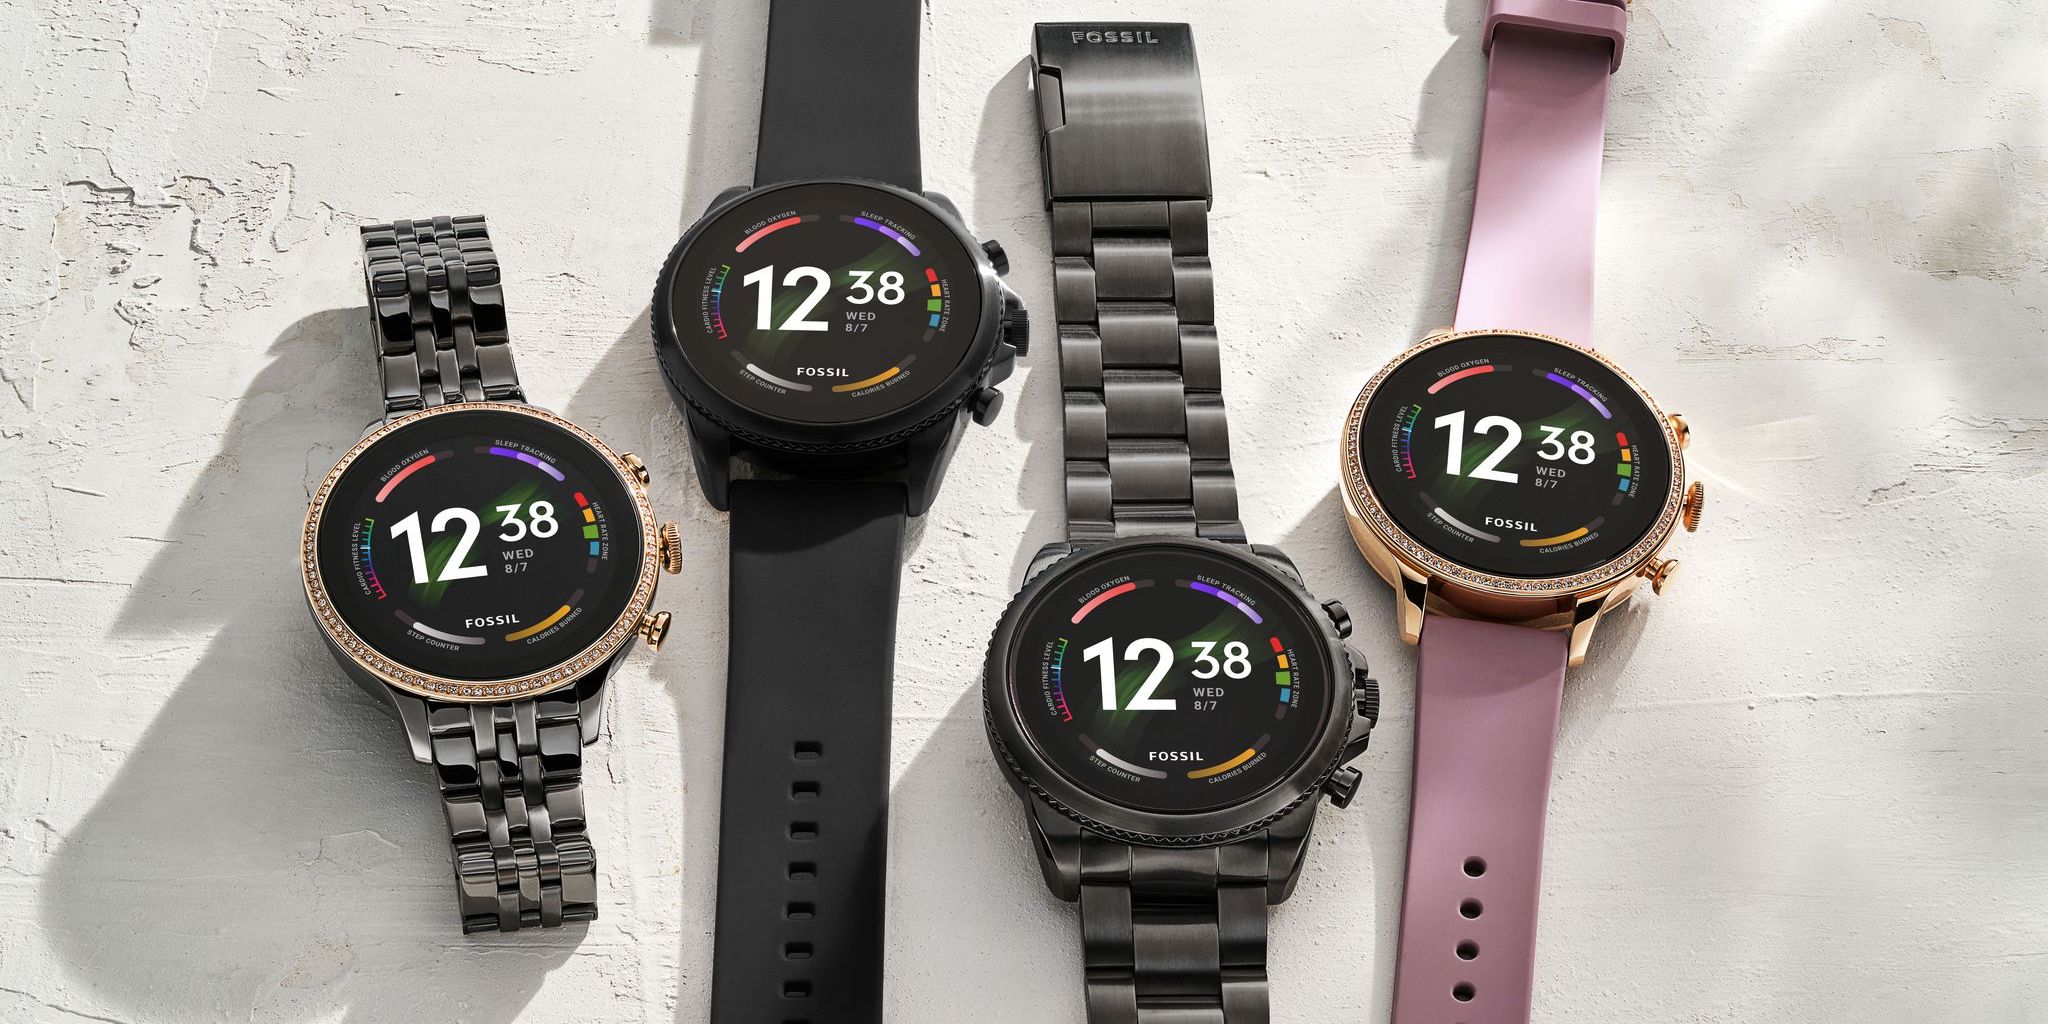 4100+, in Wear 3 Fossil unveils 2022 SpO2, - 6: OS and Gen 9to5Google